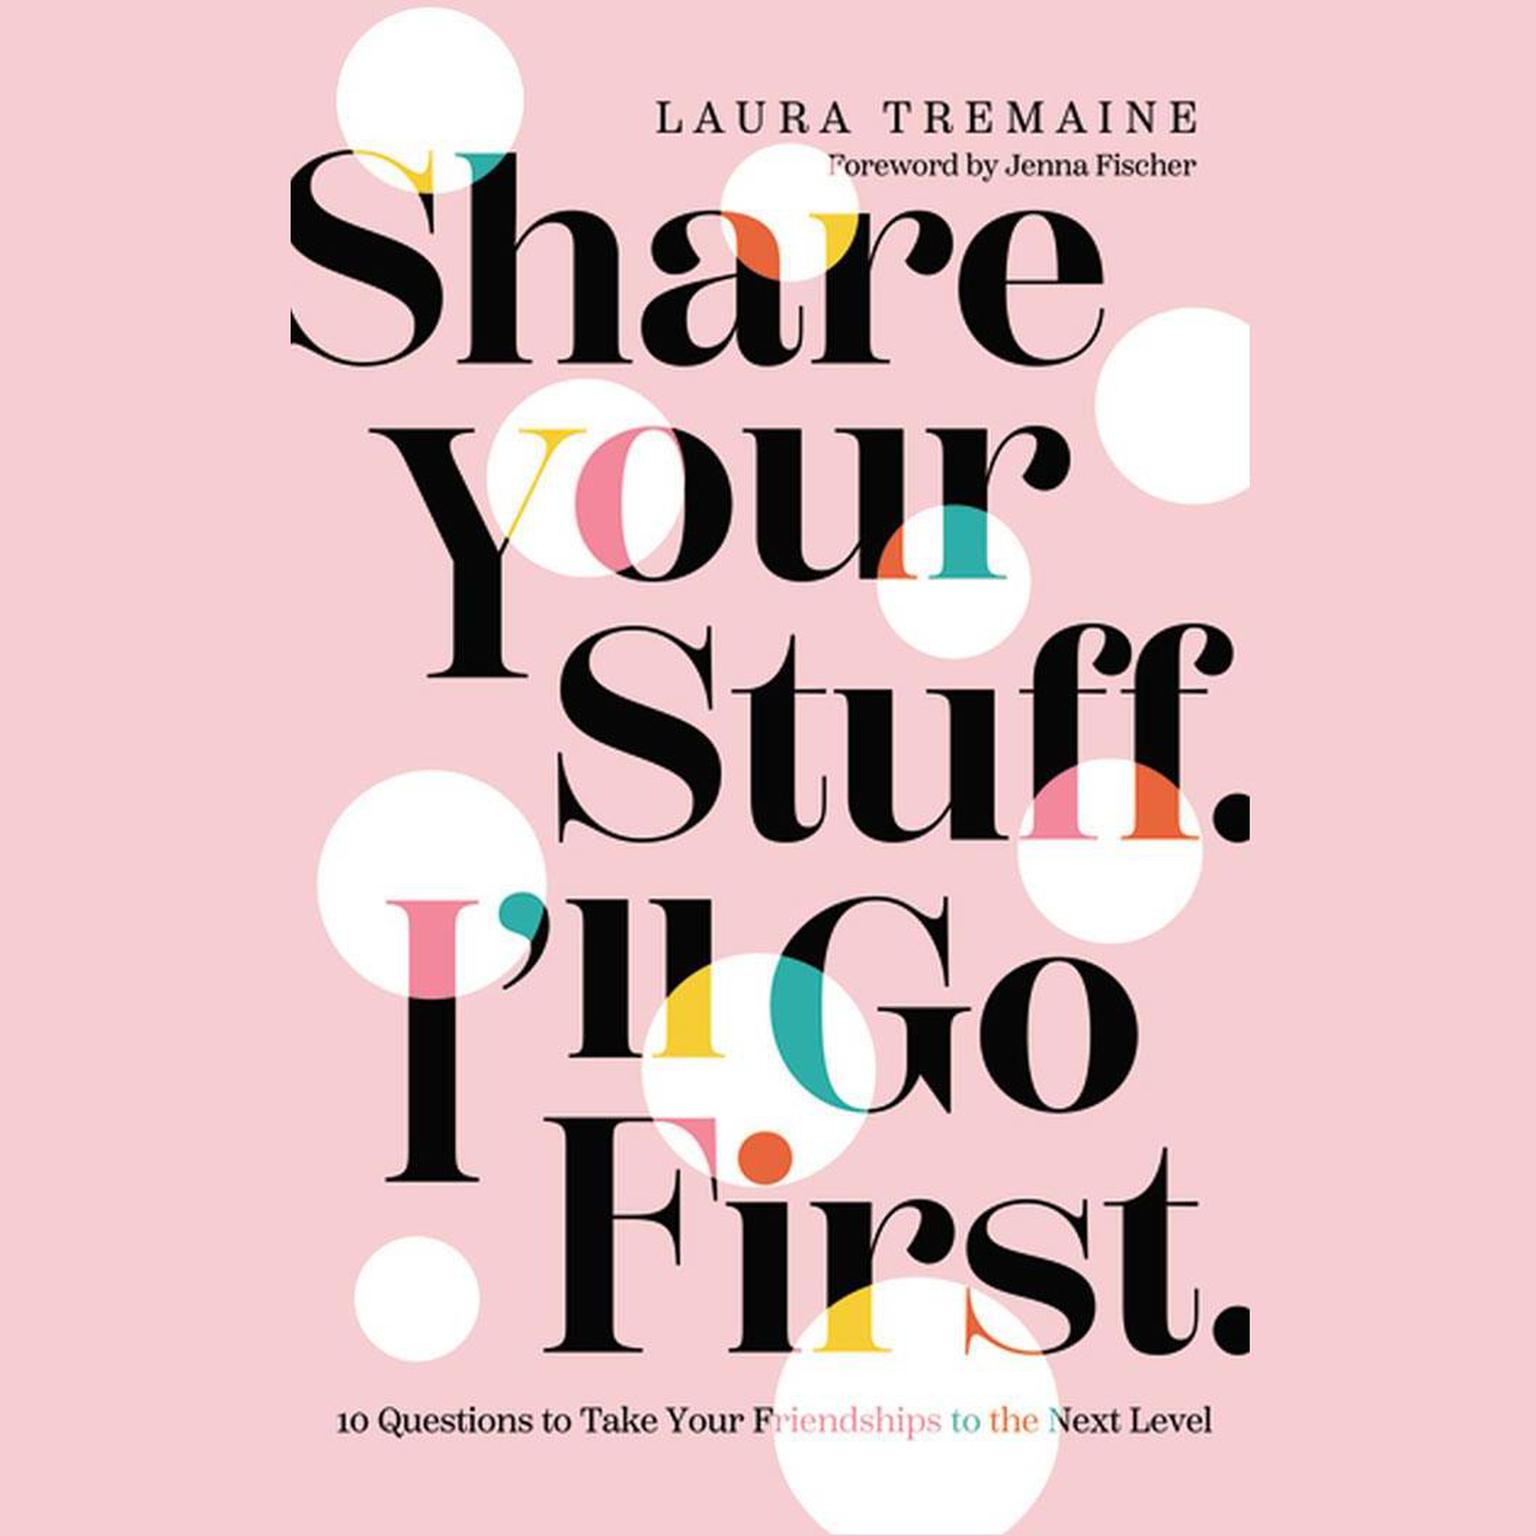 Share Your Stuff. Ill Go First.: 10 Questions to Take Your Friendships to the Next Level Audiobook, by Laura Tremaine